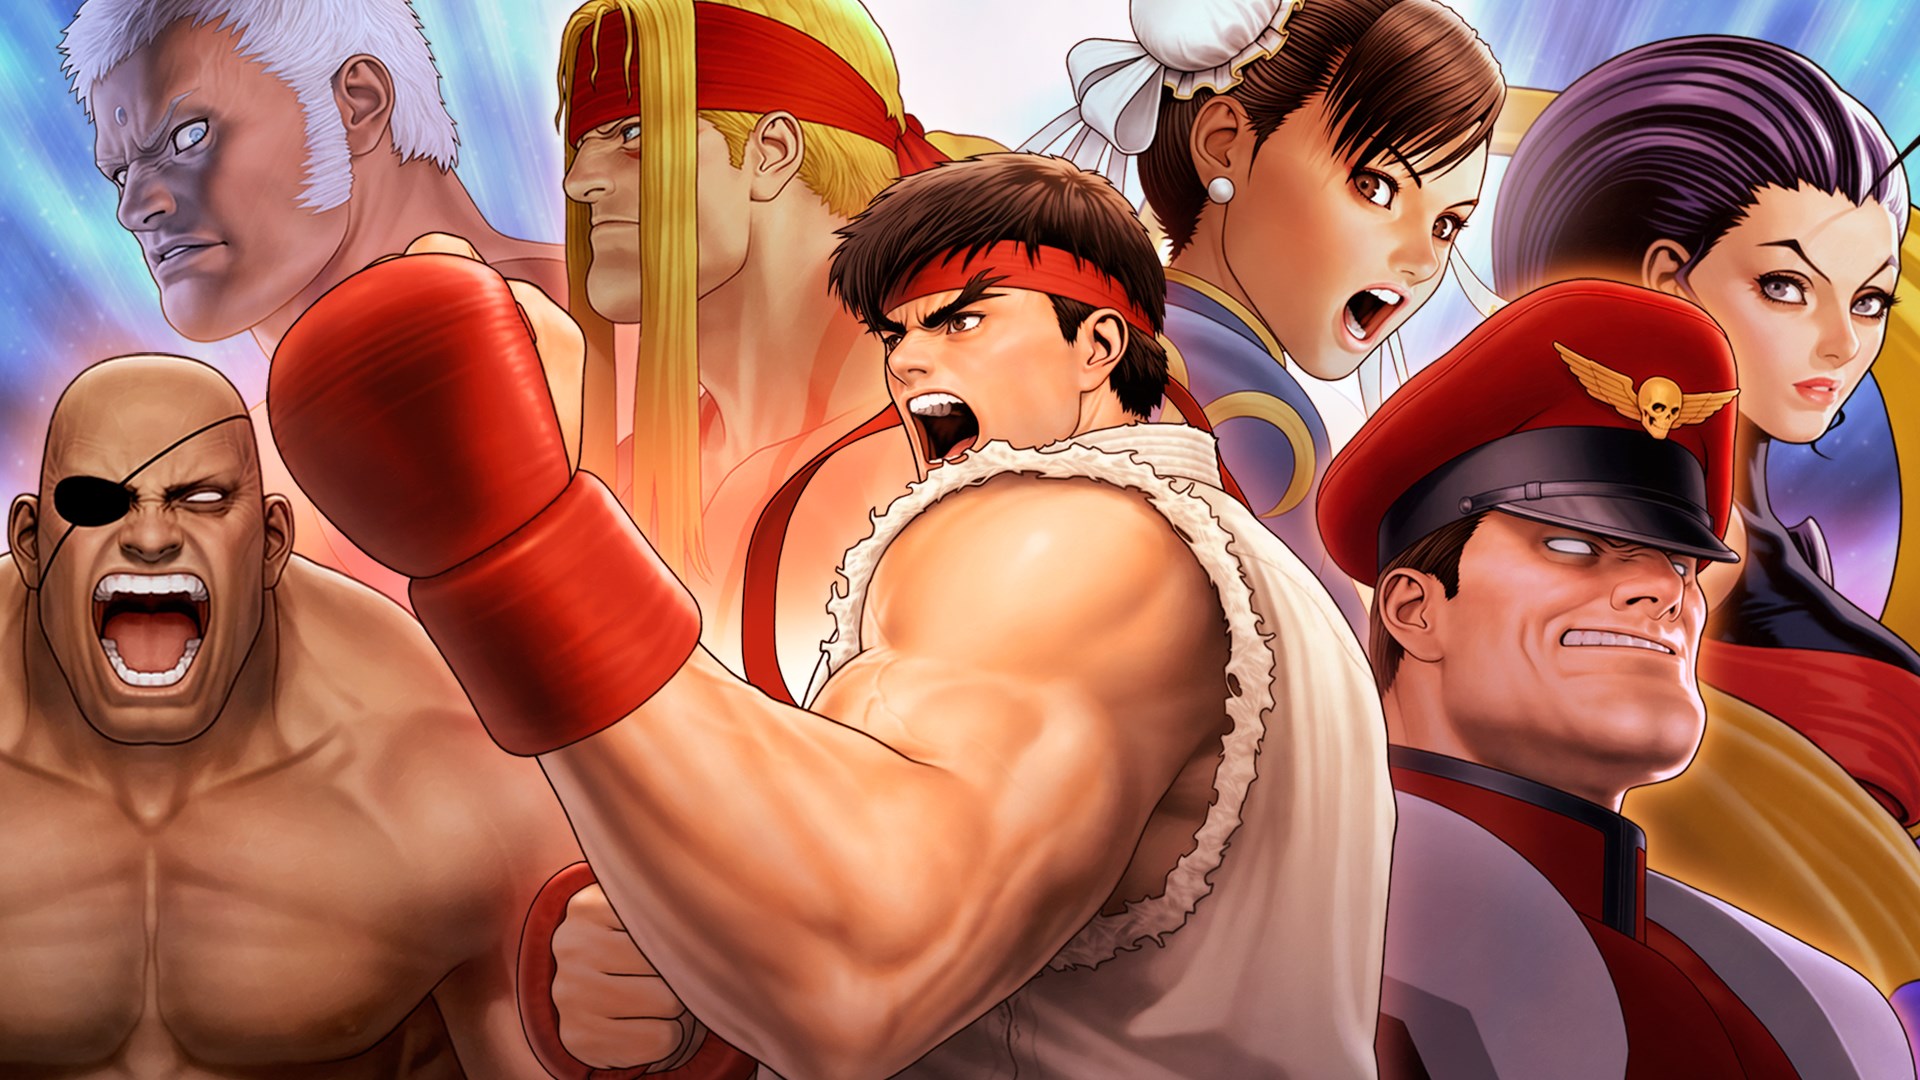 xbox one street fighter